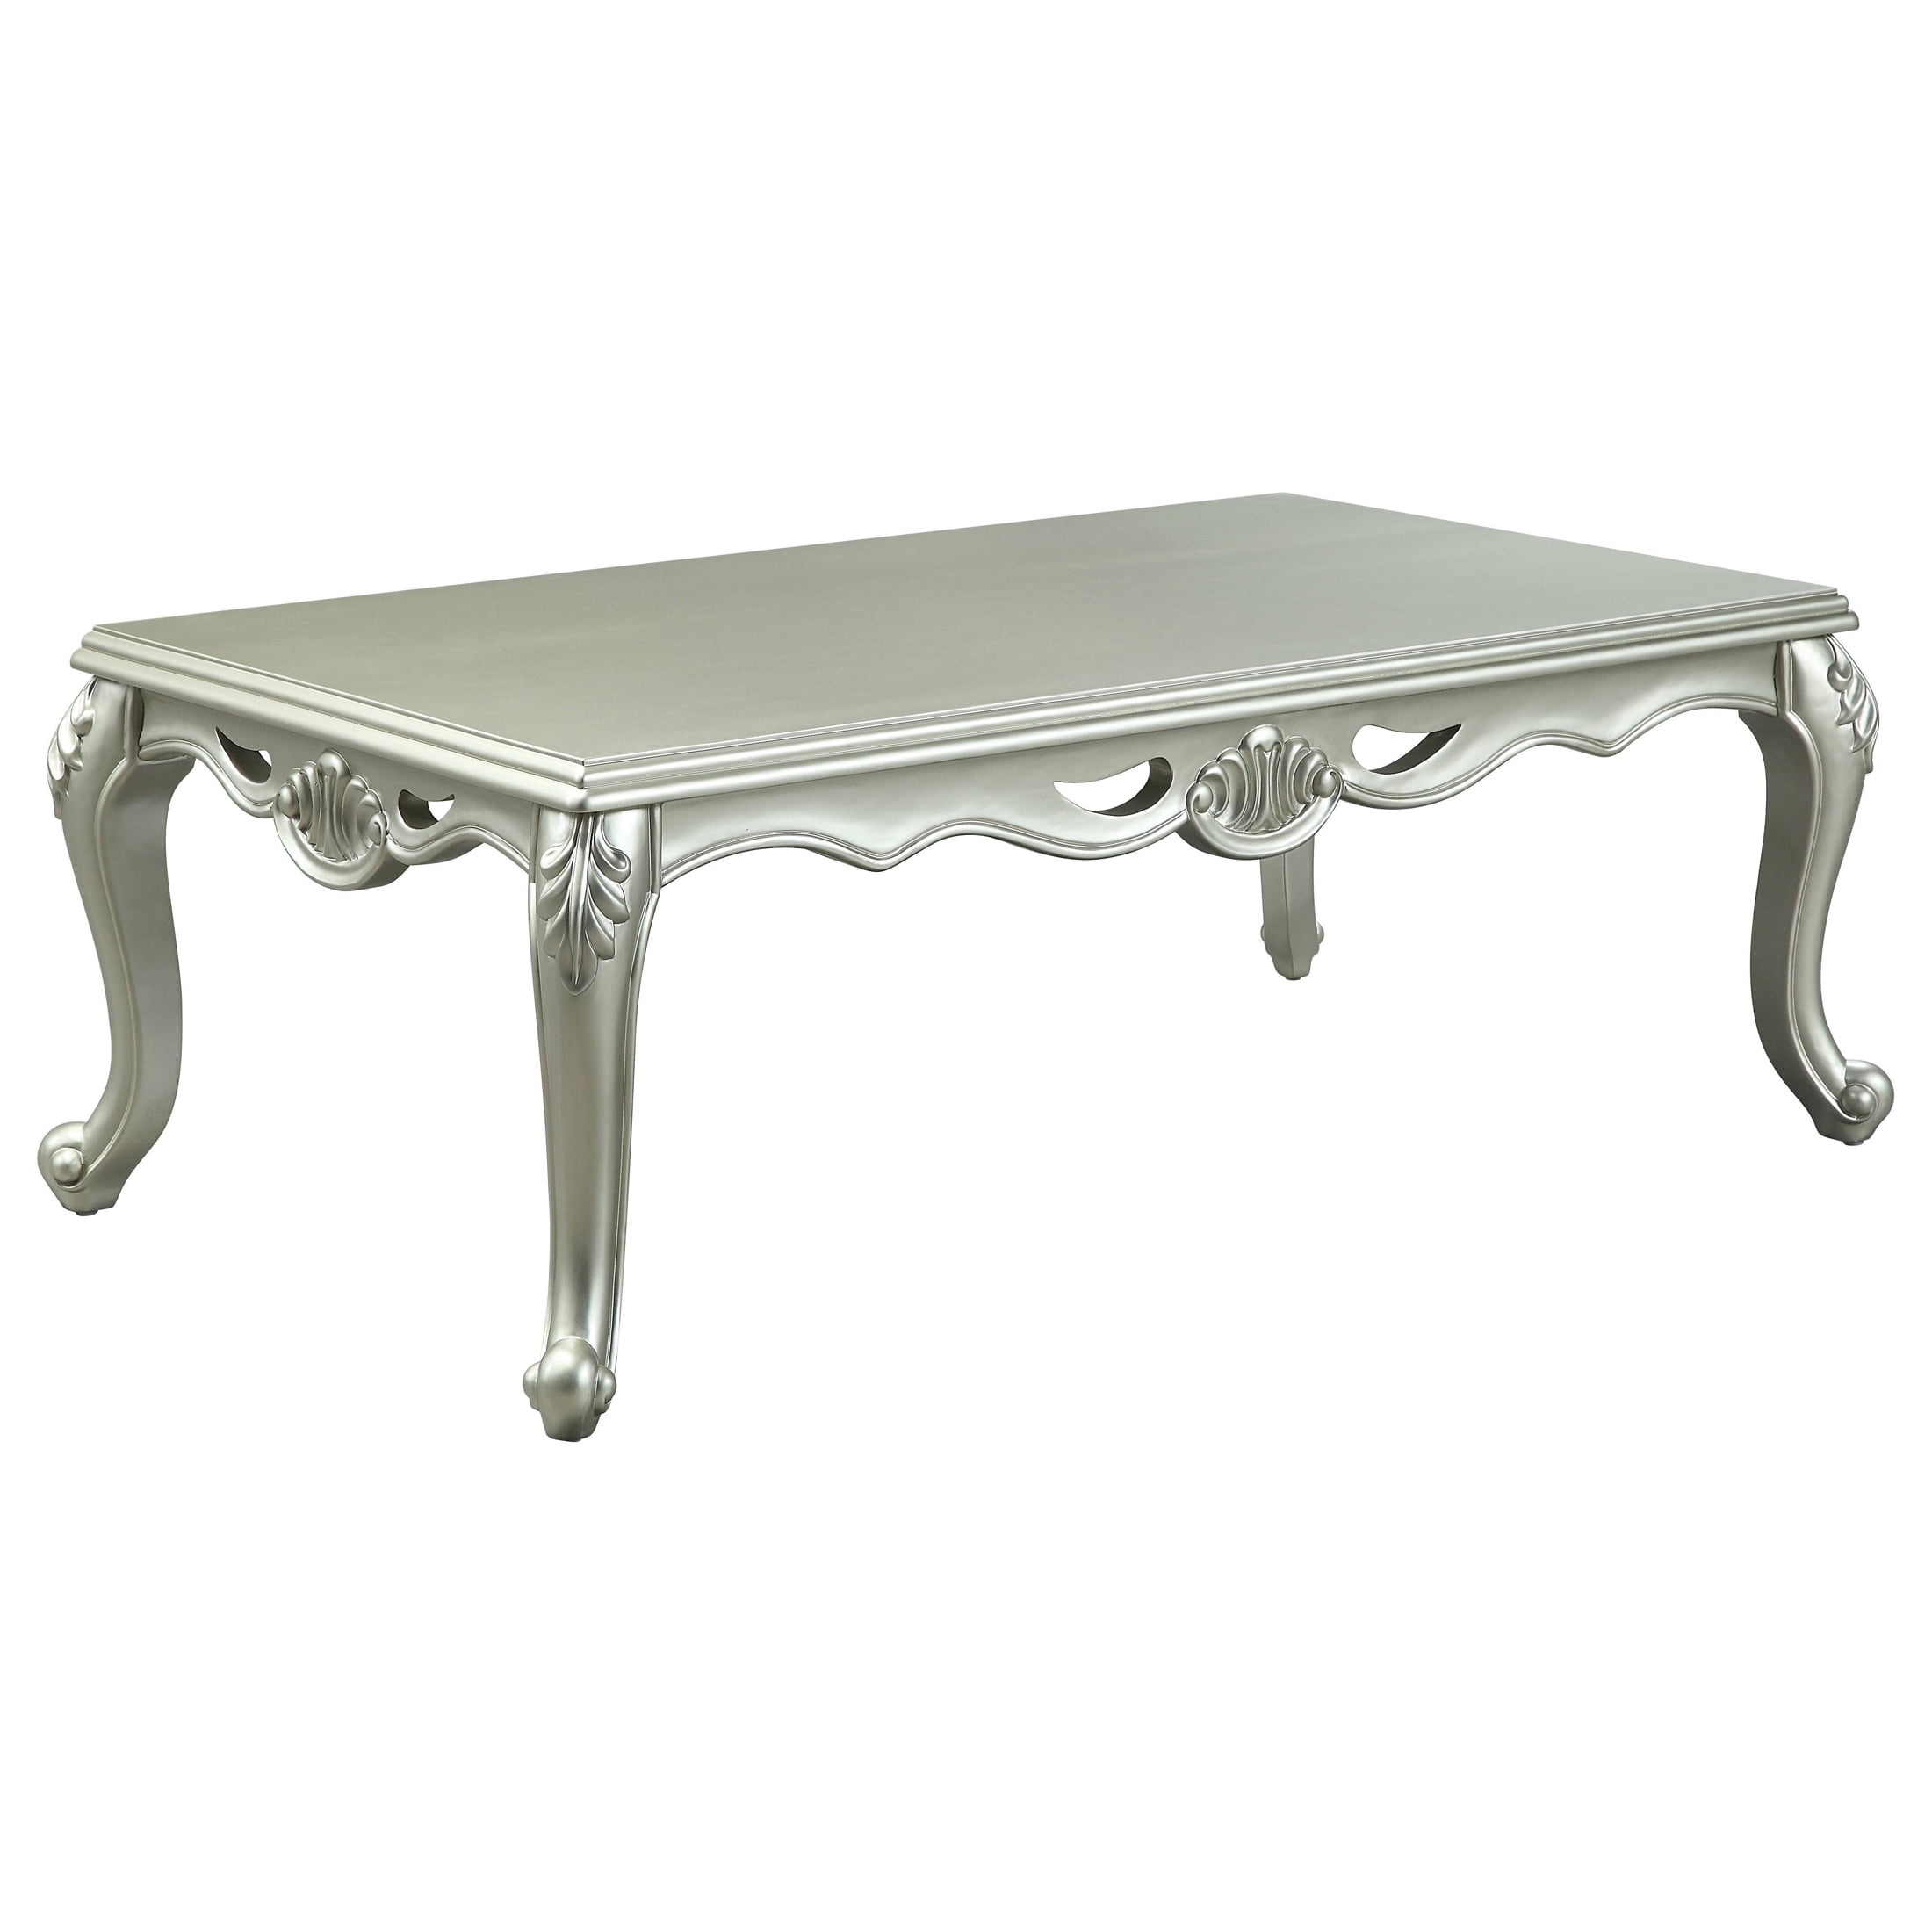 Picture of Acme Furniture LV01120 58 x 33 x 20 in. Qunsia Coffee Table, Champagne